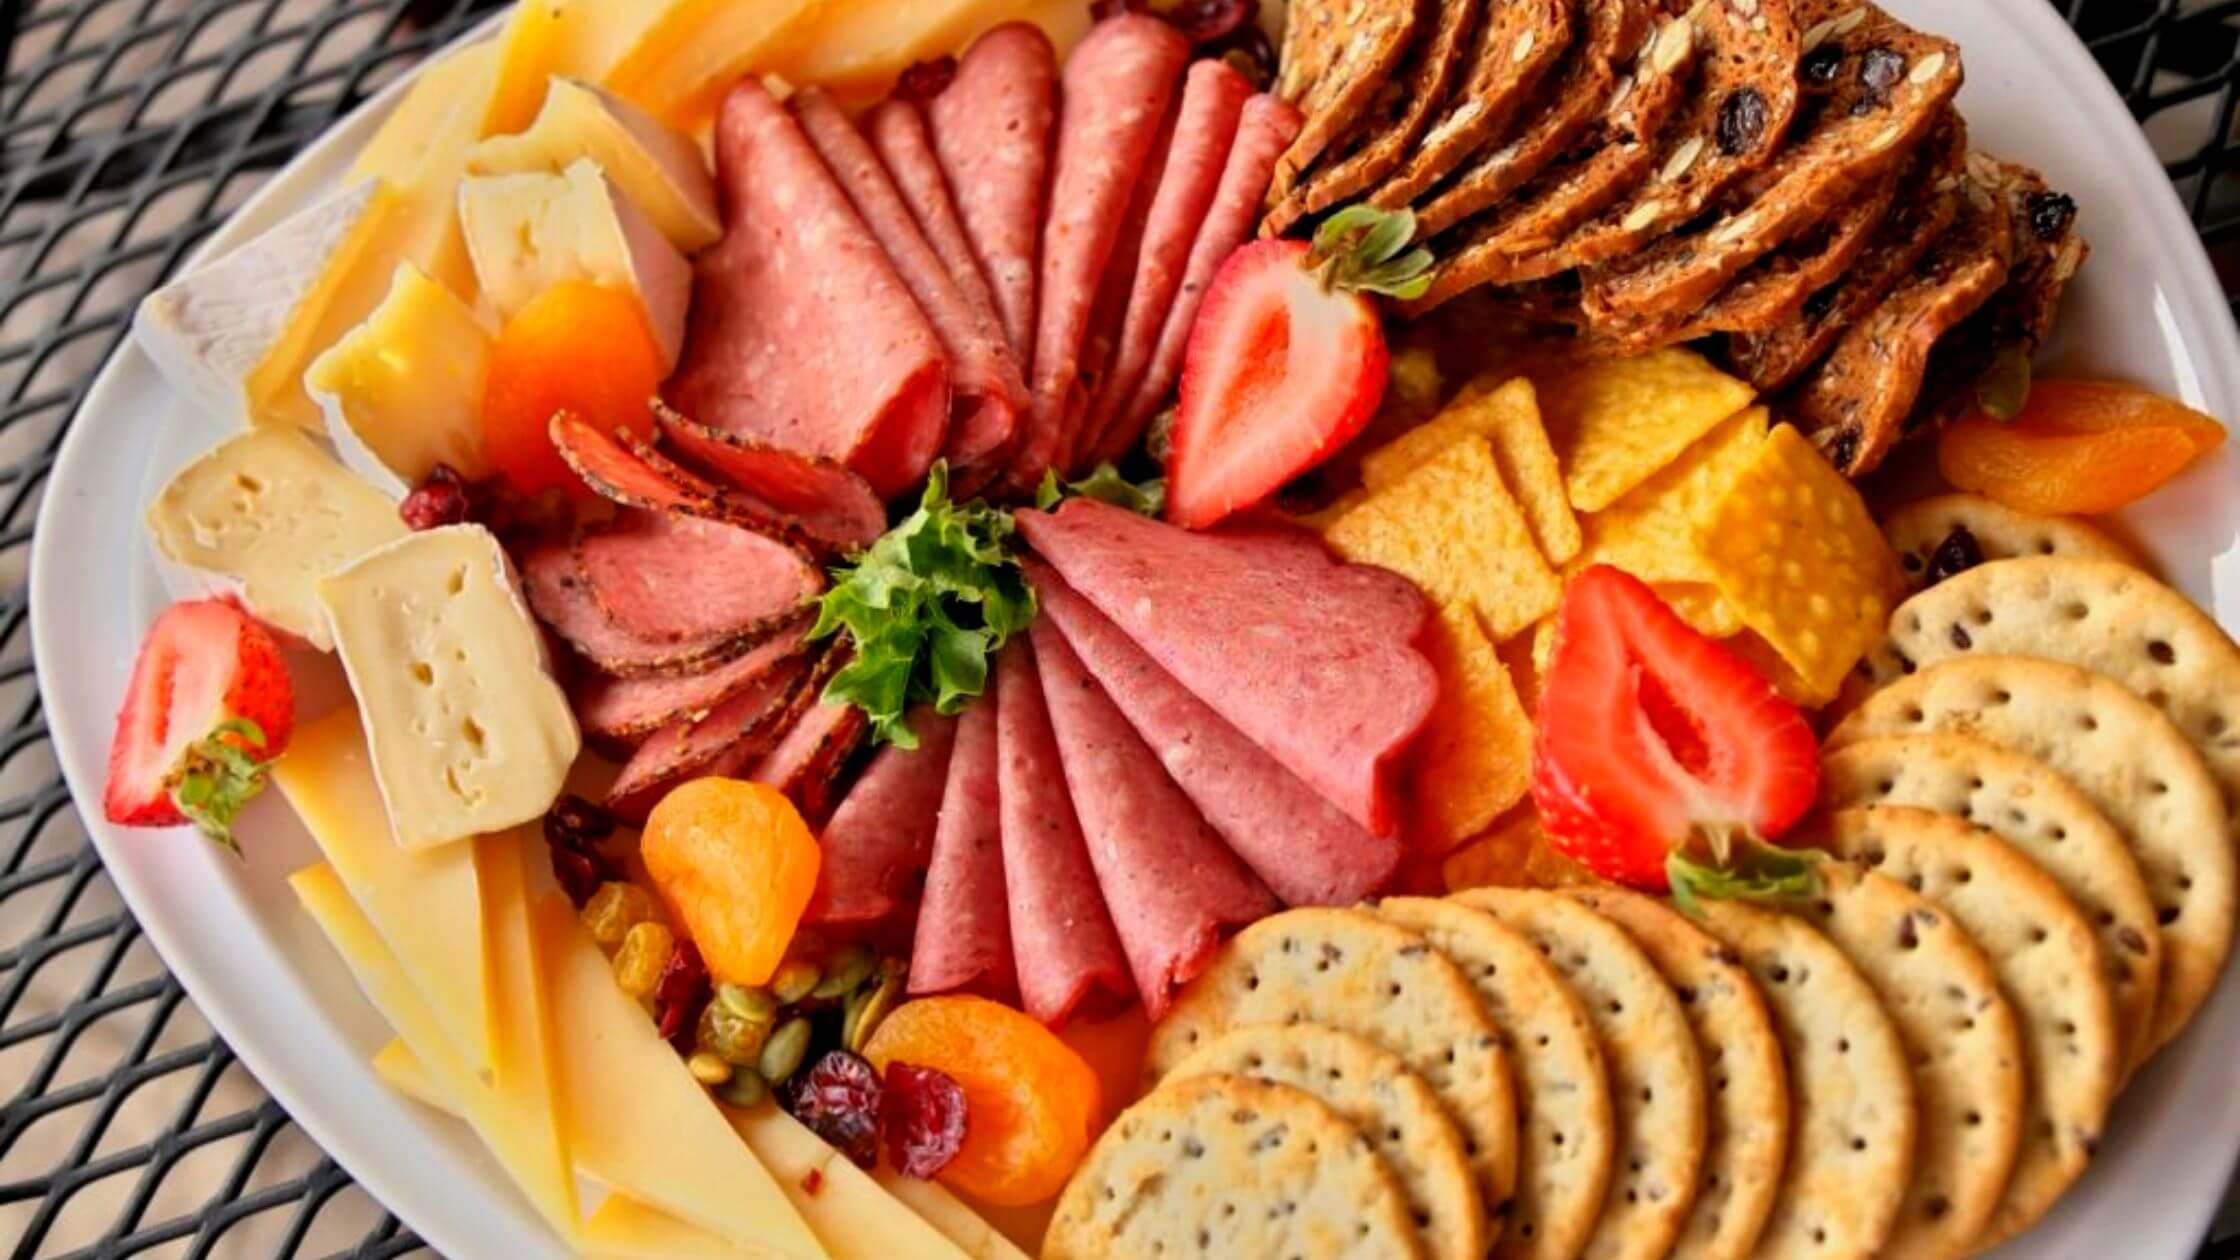 A Deadly Listeria Outbreak Has Been Reported In Six States Linked To Deli Meat And Cheese